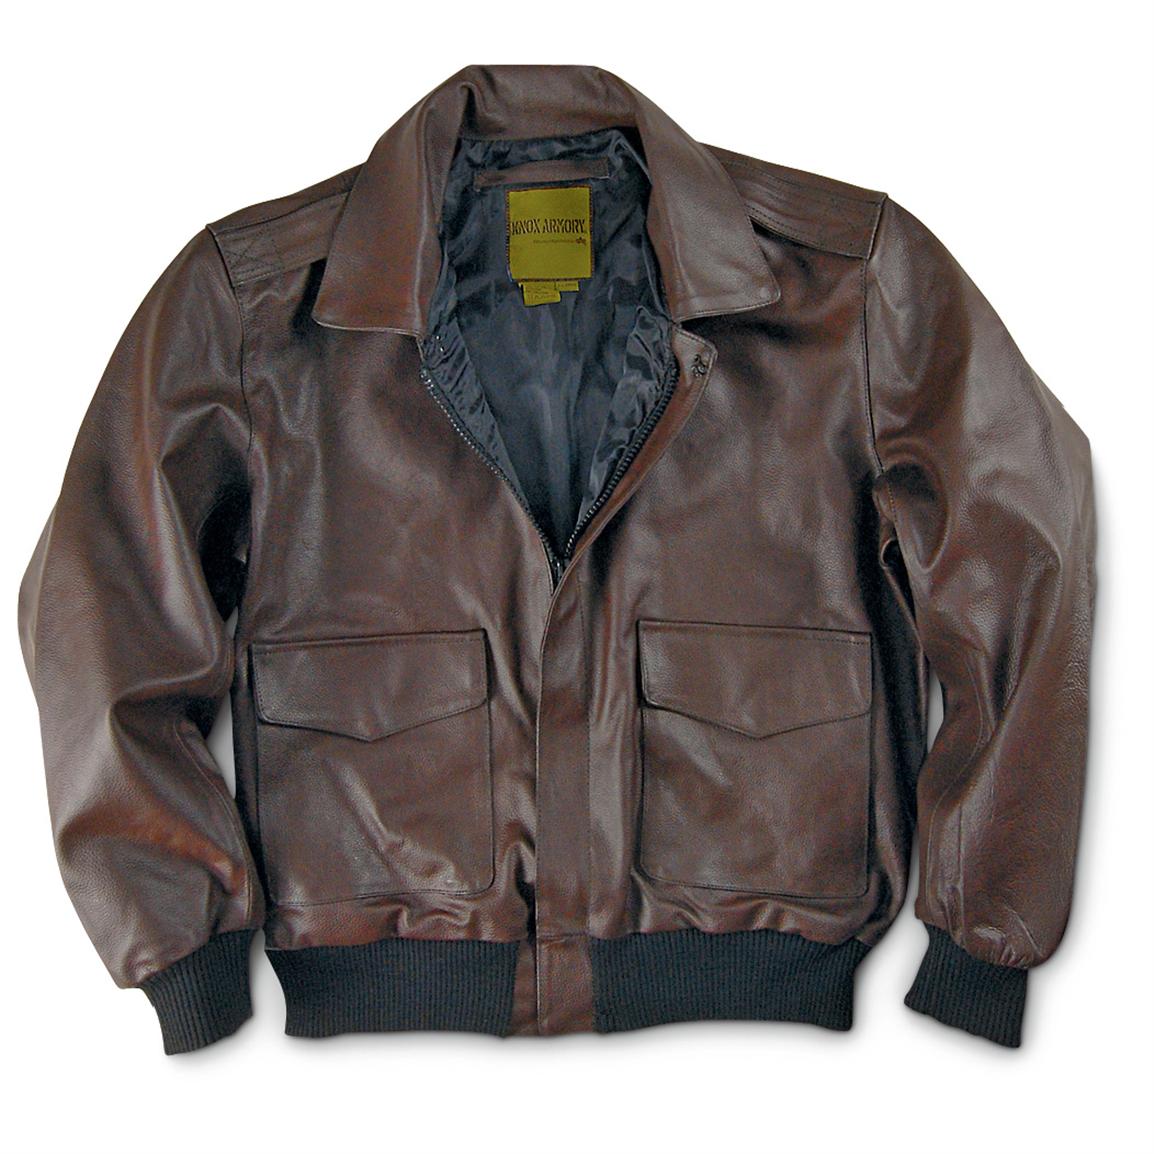 Knox Armory Military-style A2 Leather Jacket Brown - 207051